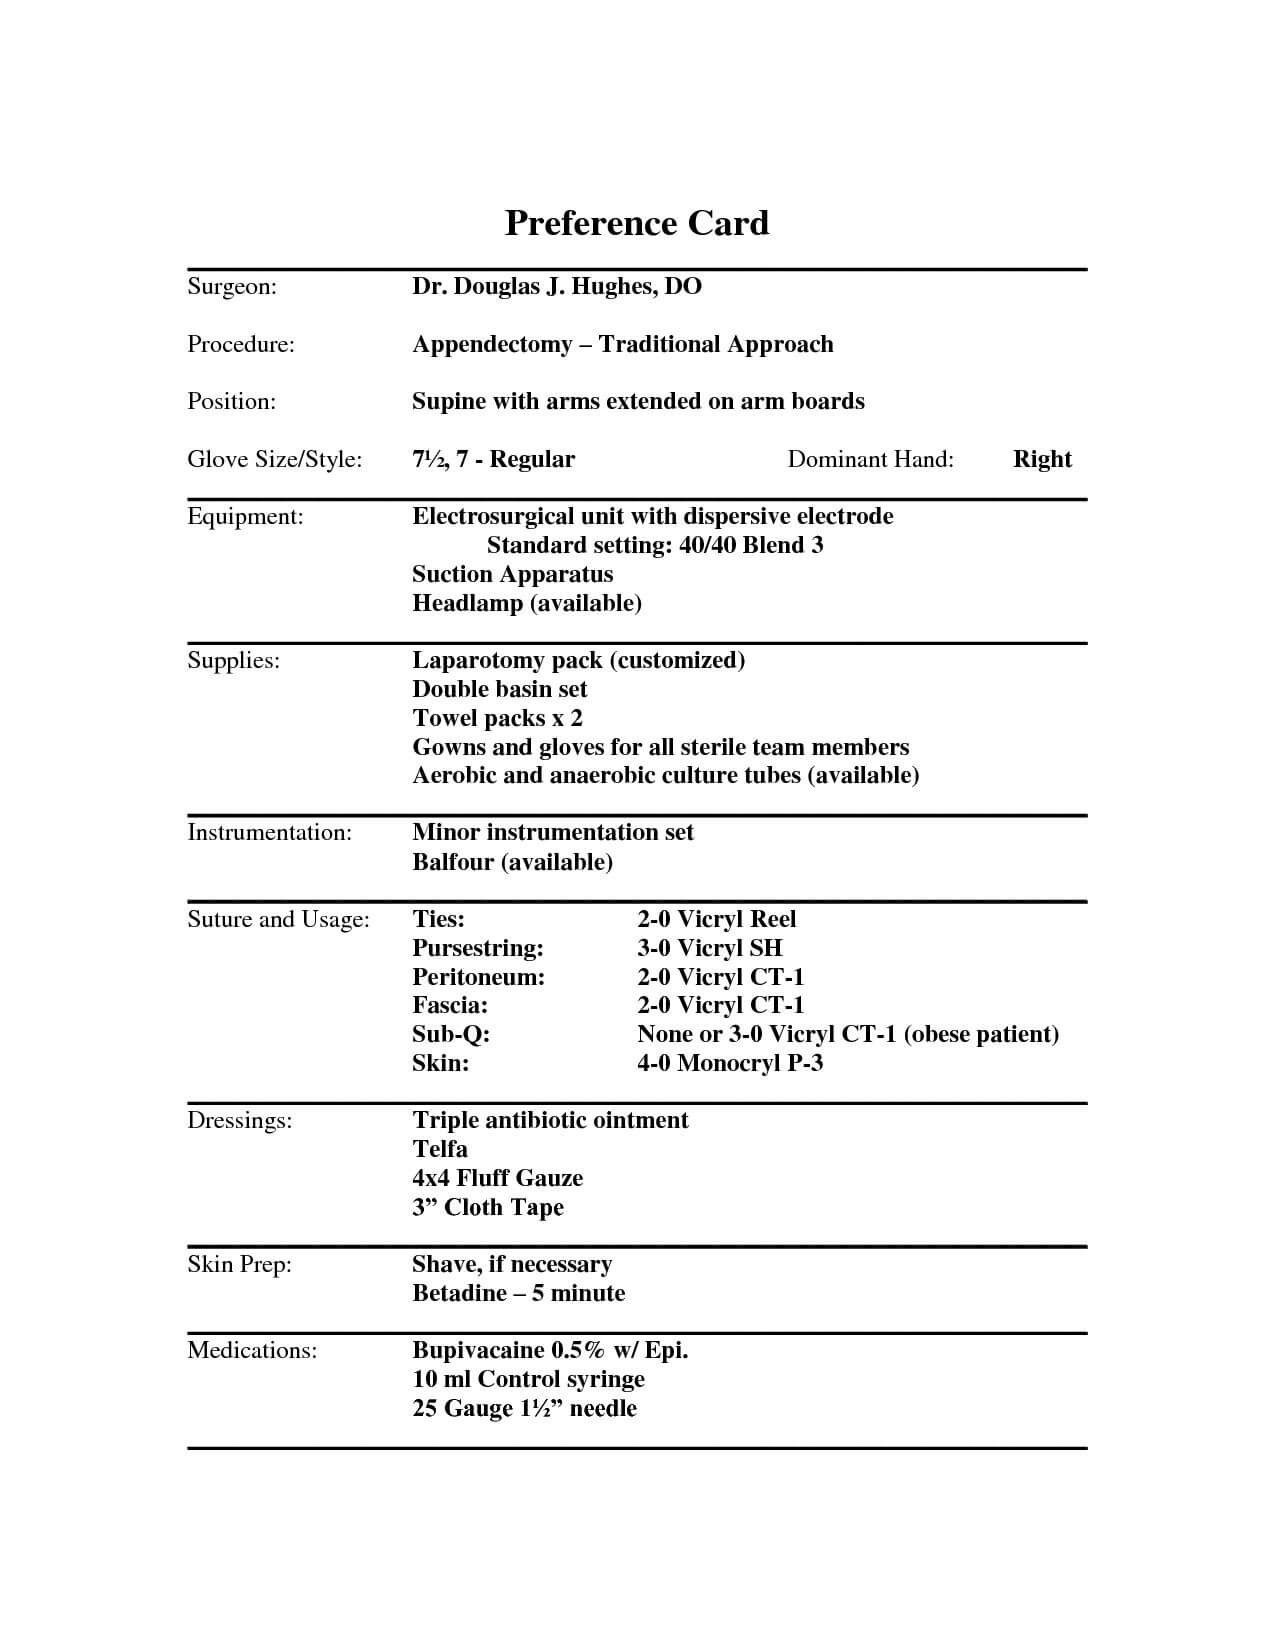 Example Of A Surgeons Preference Card | Operating Room Nurse Intended For Med Card Template